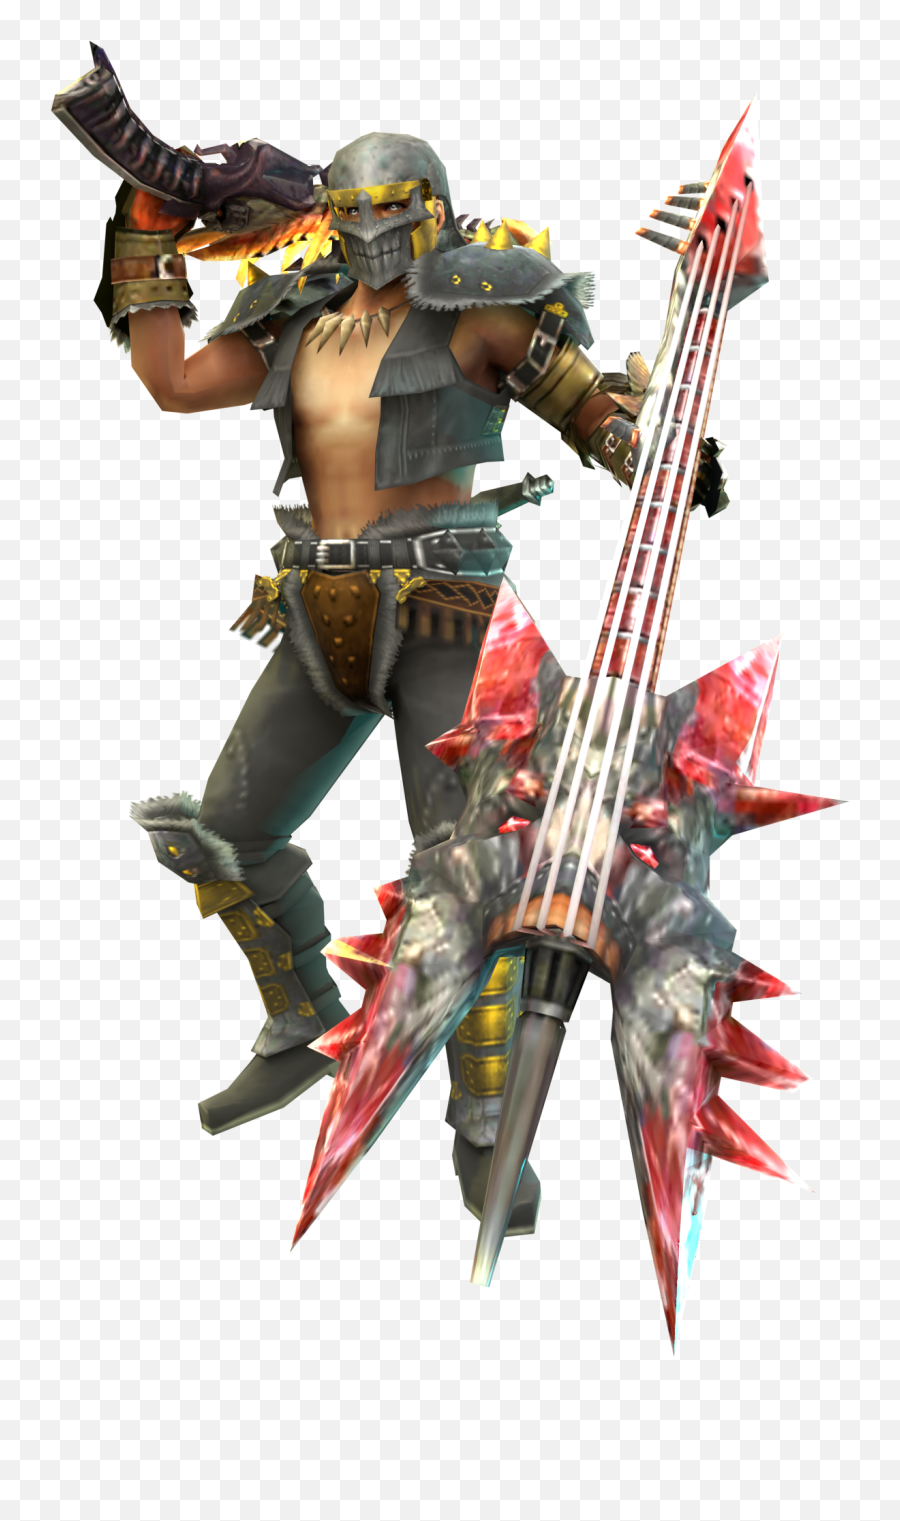 Monster Hunter Du0026d 5th Edition - Fictional Character Png,Zamtrios Icon